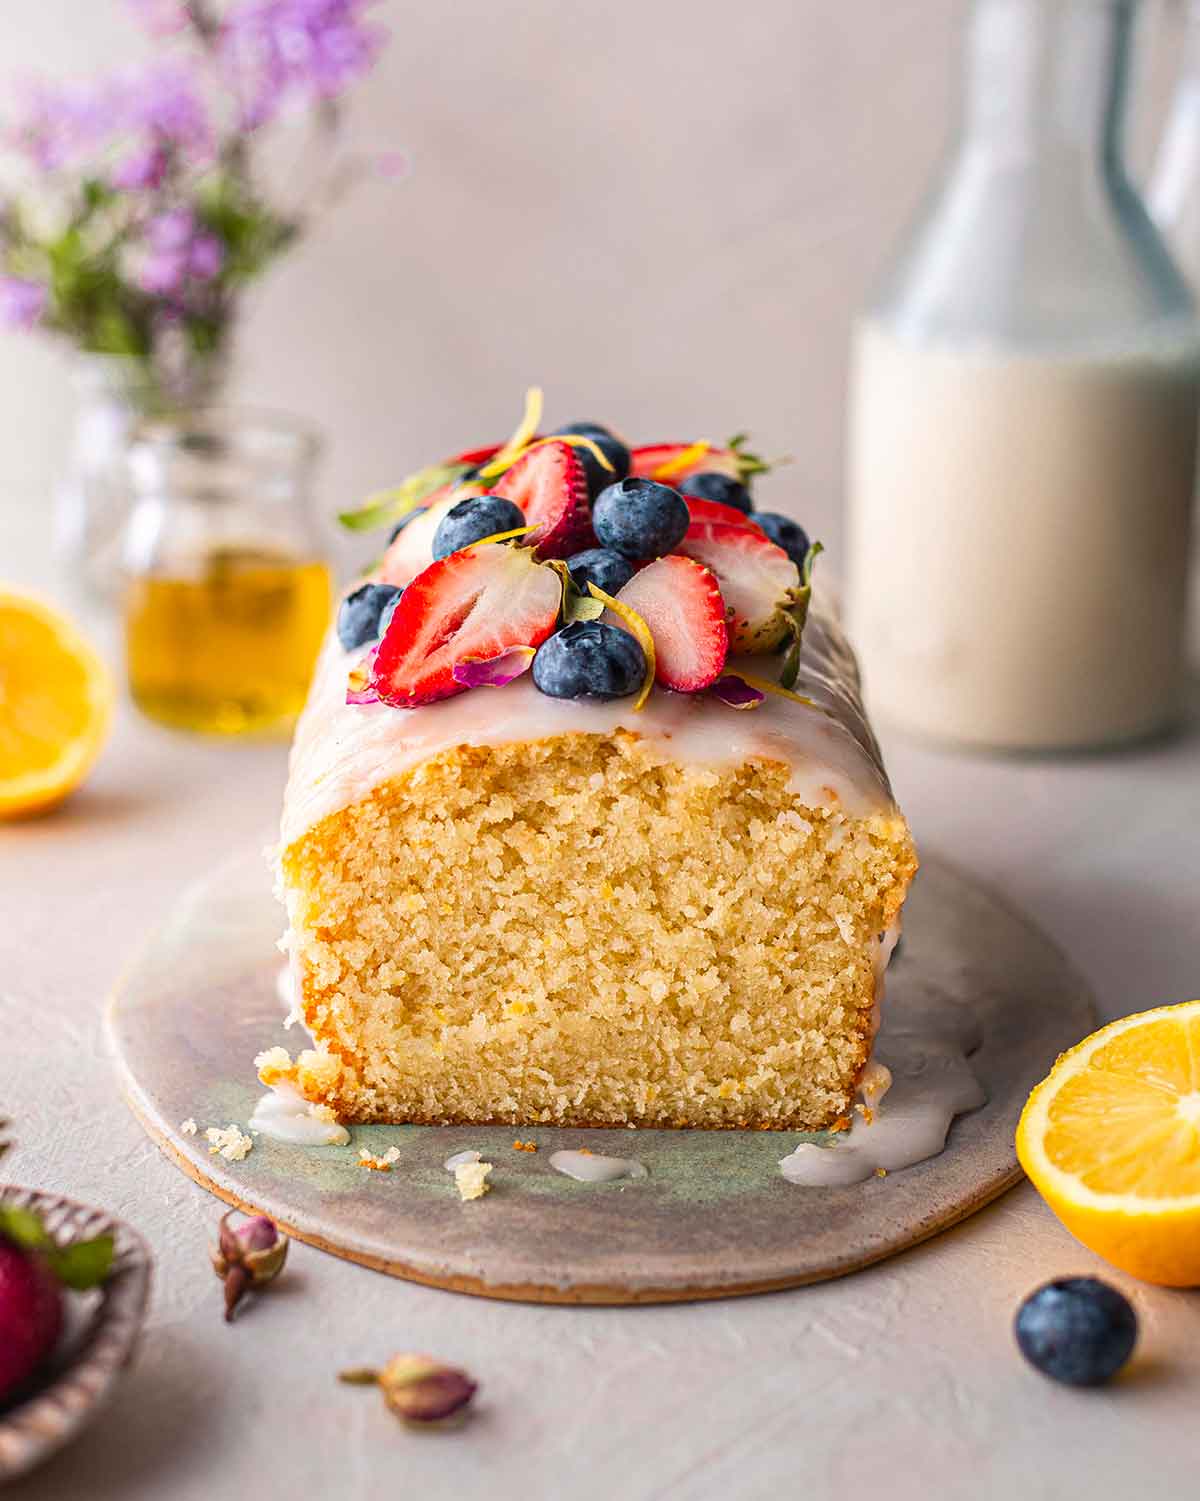 Front image of lemon cake showing fluffy texture.